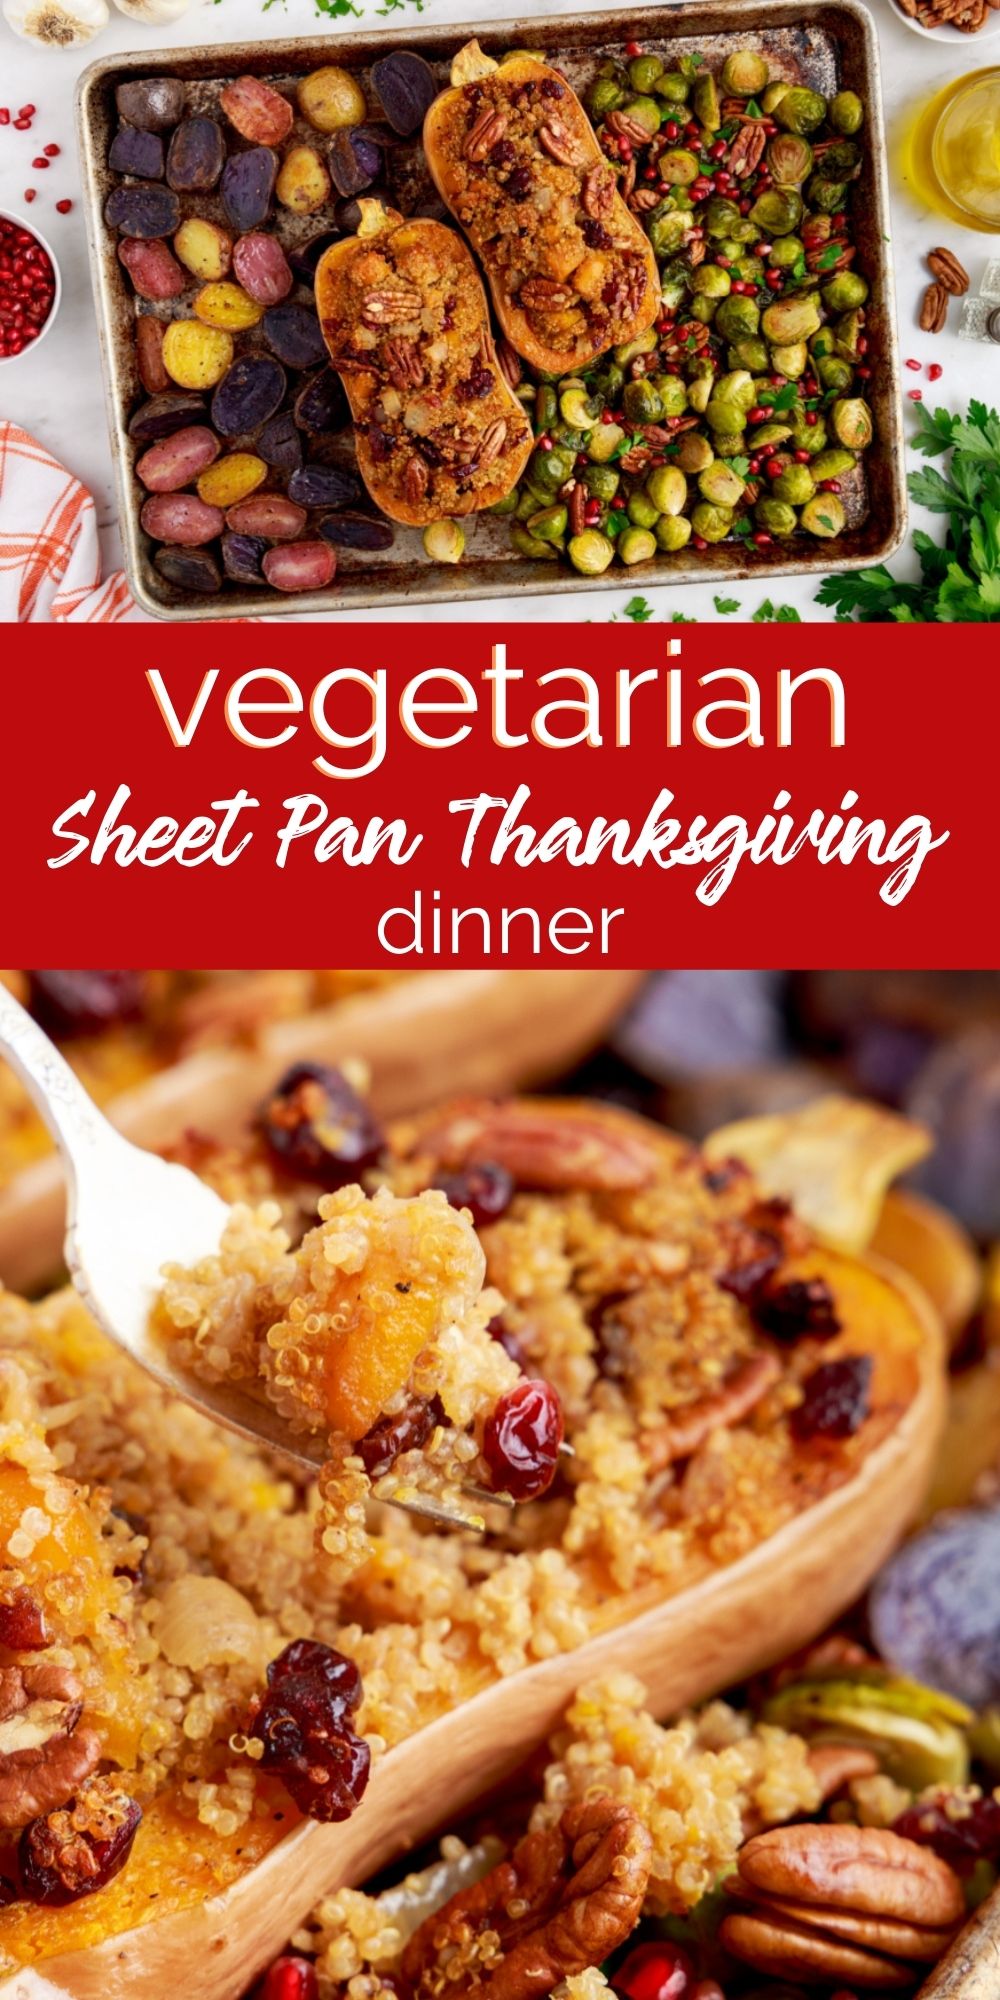 Being a vegetarian can be tough sometimes. Especially on Thanksgiving. Here is an amazing Vegetarian Sheet Pan Thanksgiving Dinner. via @familyfresh